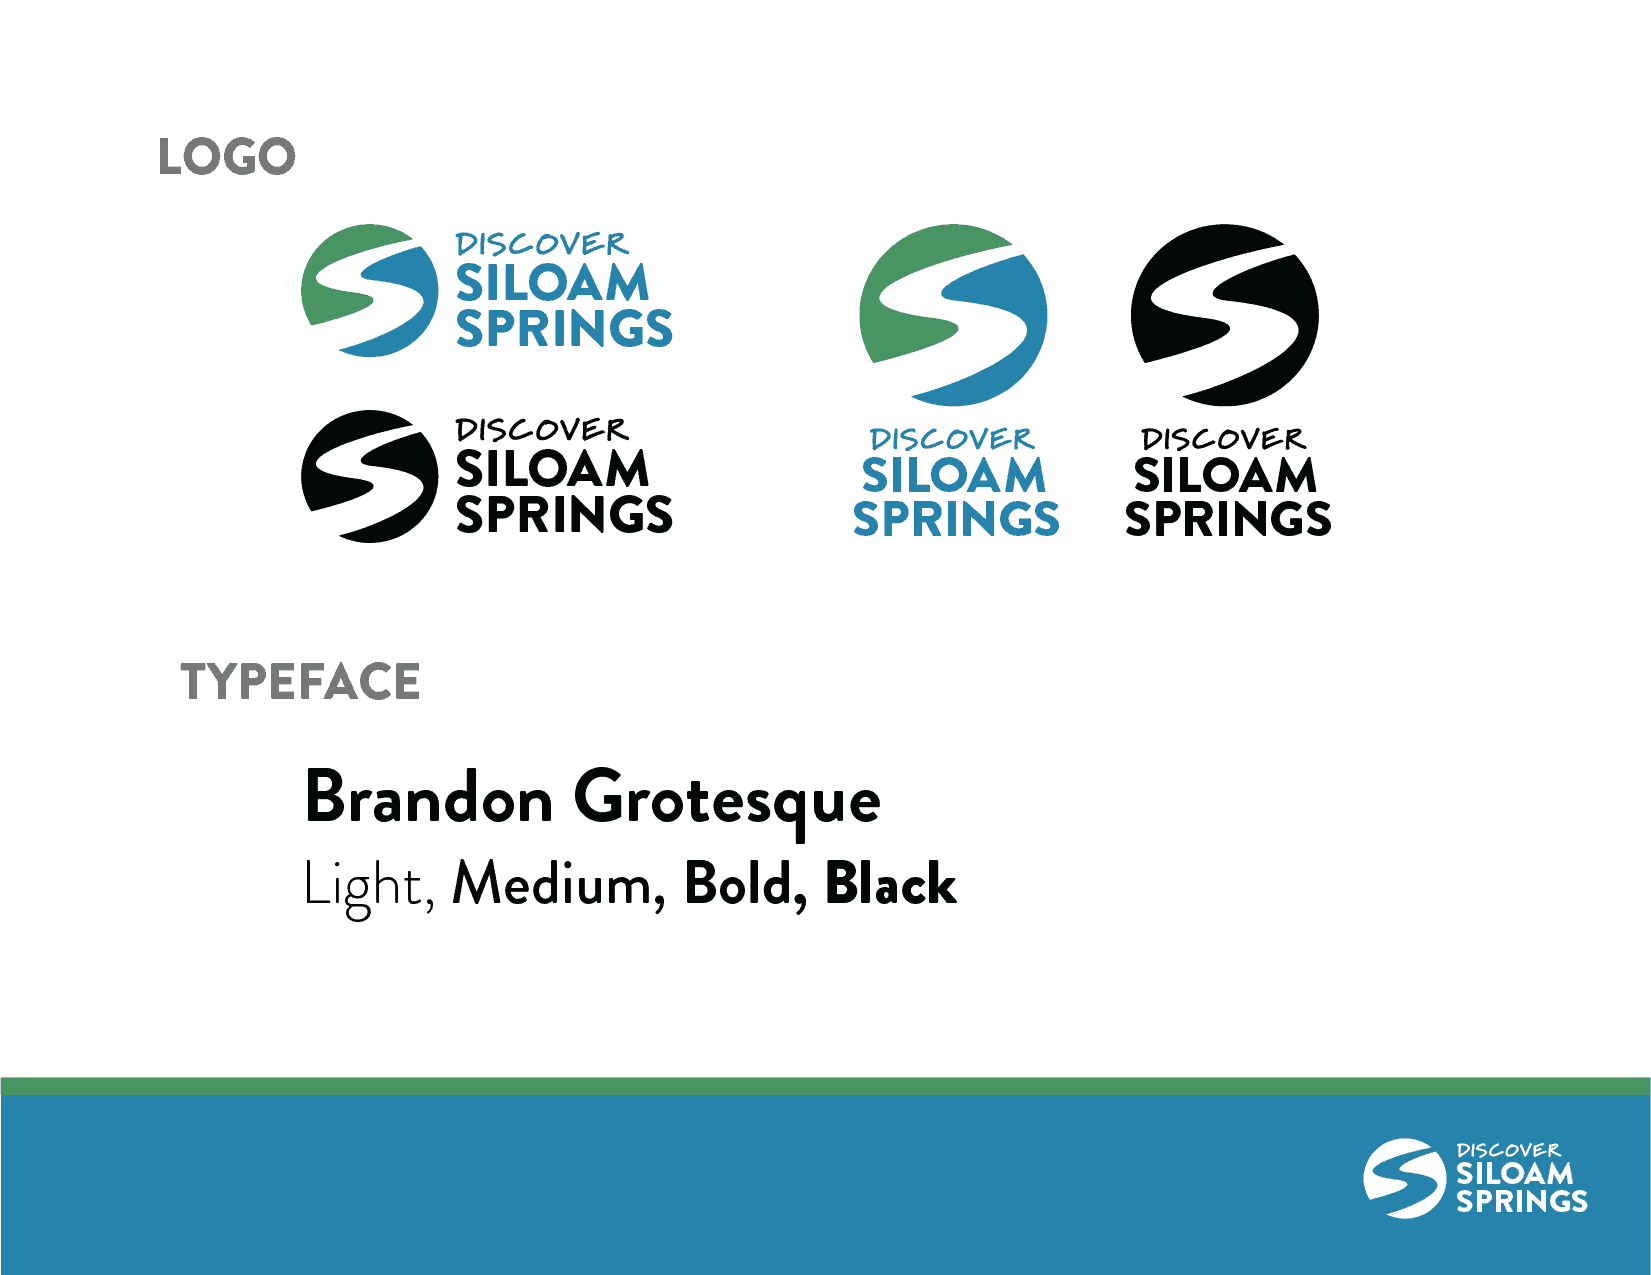 Discover Siloam Springs Brand Guidelines - Page 2